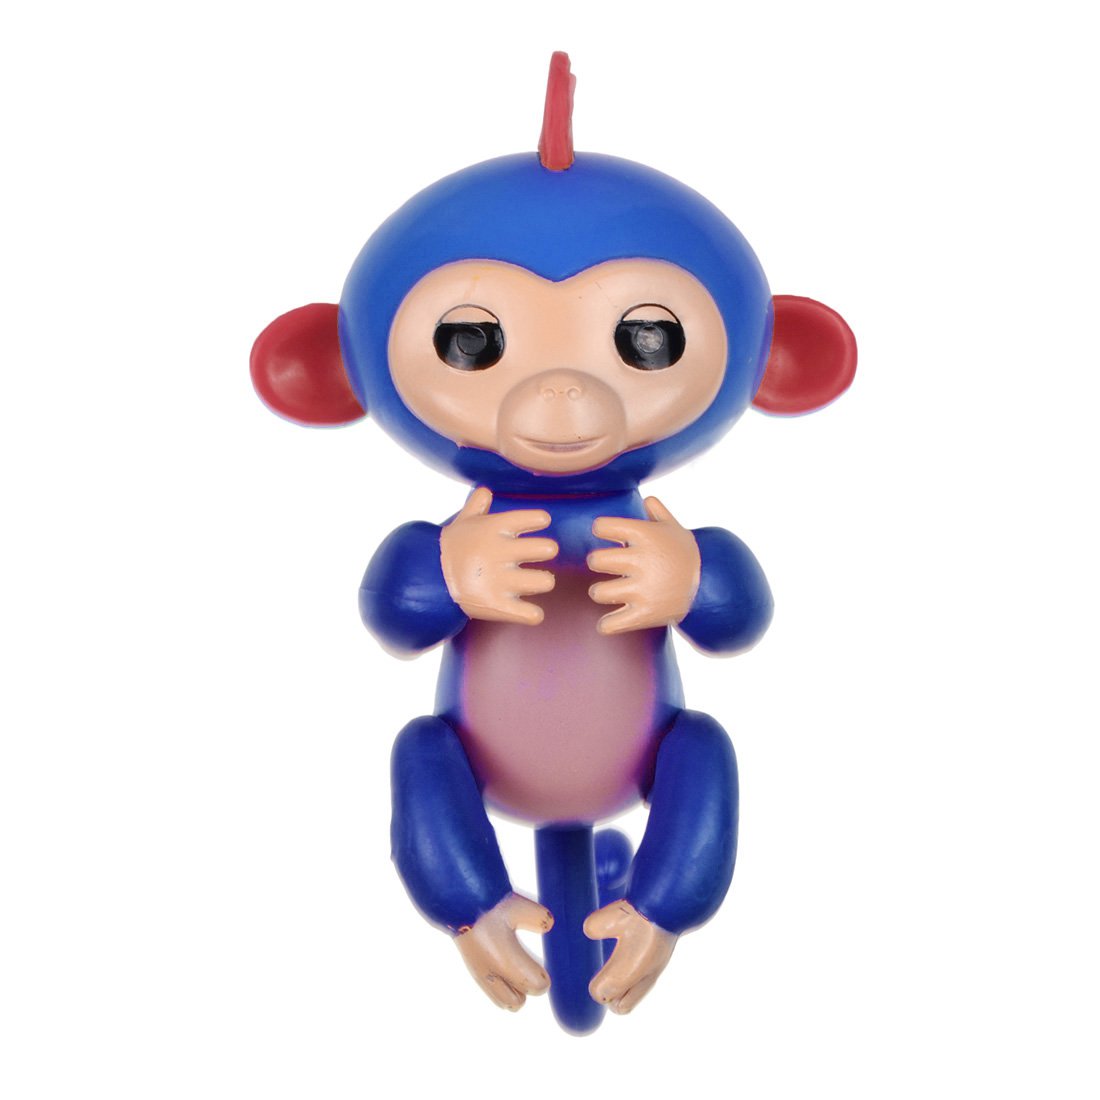 Non-interactive Baby Monkey Fingerlings Zoe Kids Toy Gift No Response Blue